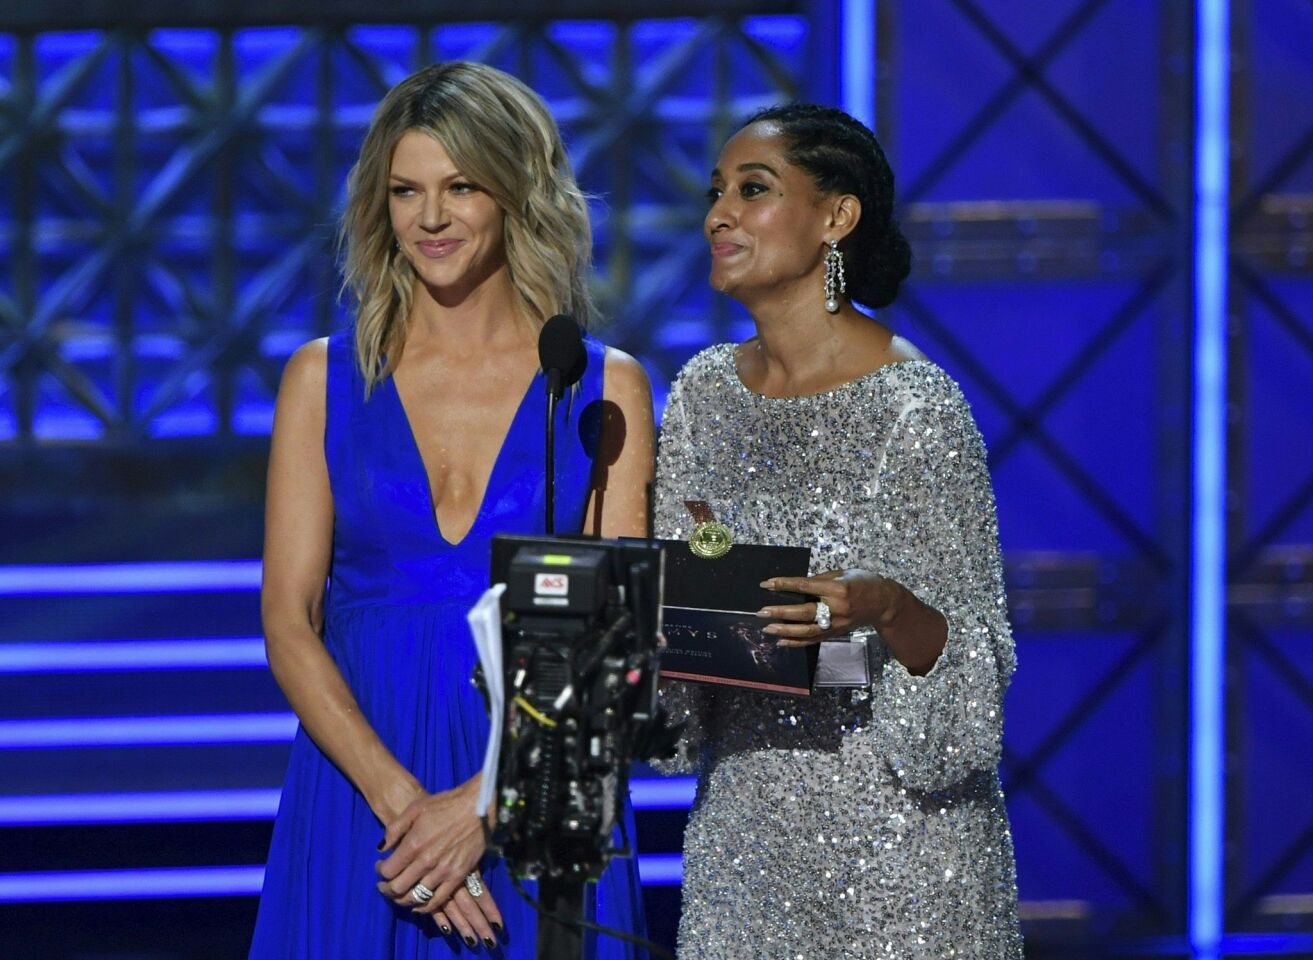 Kaitlin Olsen and Tracee Ellis Ross onstage during the 69th Emmy Awards.